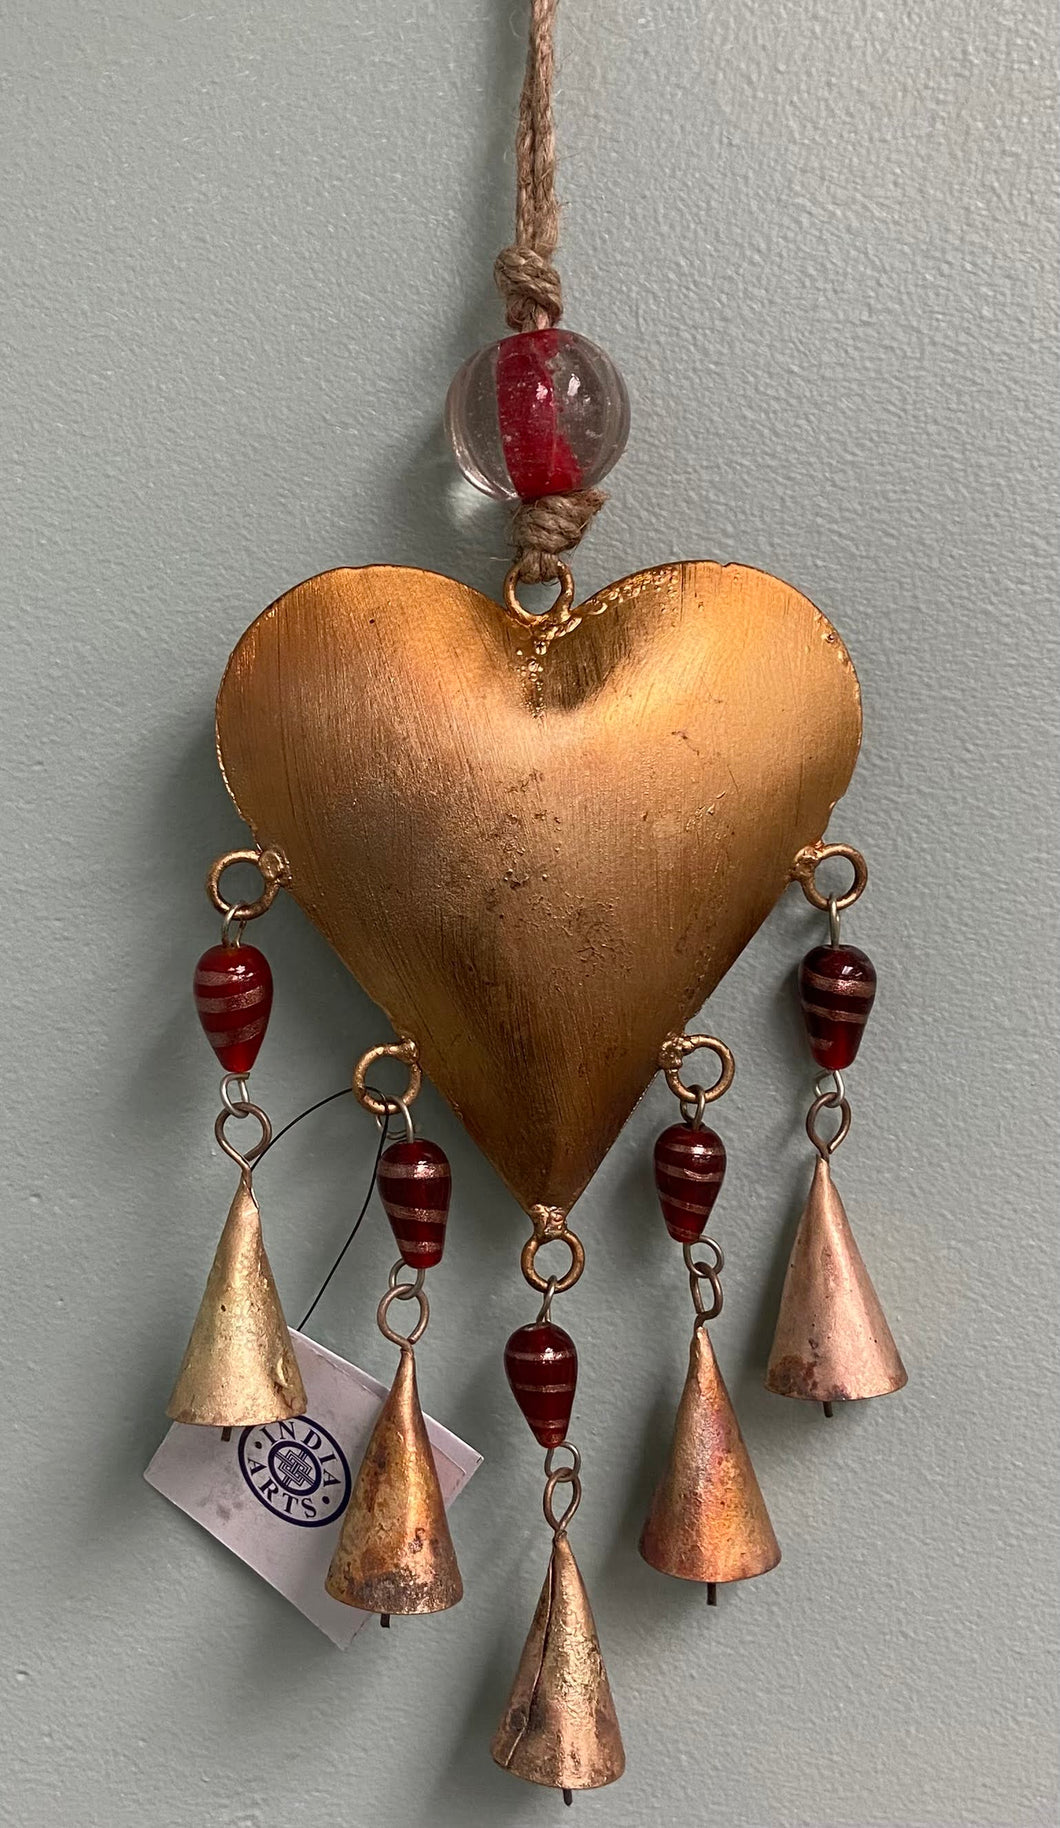 Iron Heart Chime w/ 5 Bells and Beads